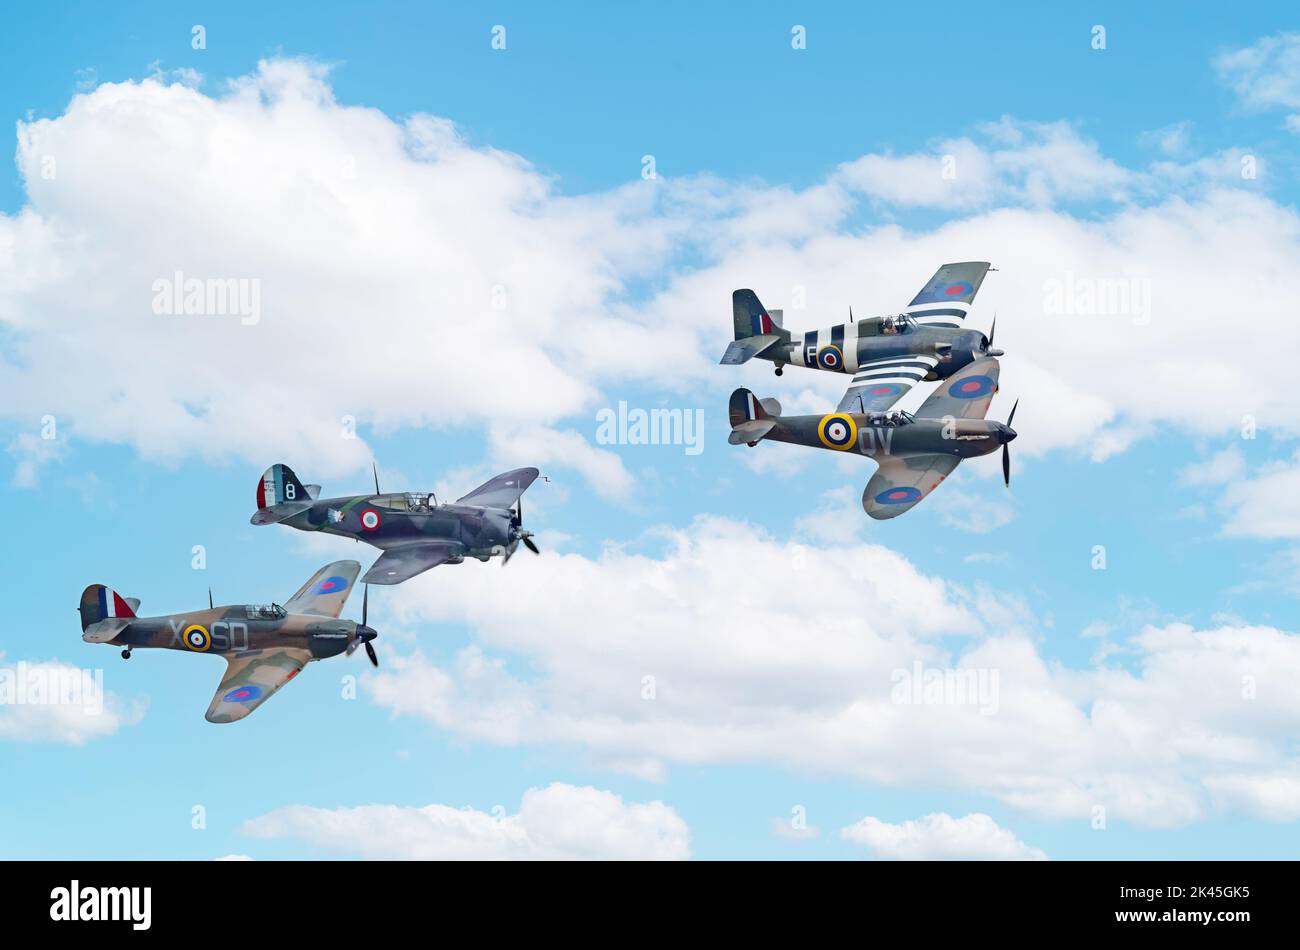 Group of four WW2 planes flying; from left, Hawker Hurricane MkI, Curtiss Hawk 75, Grumman FM-2 Wildcat, and Spitfire Mk Ia, Imperial War Museum Stock Photo